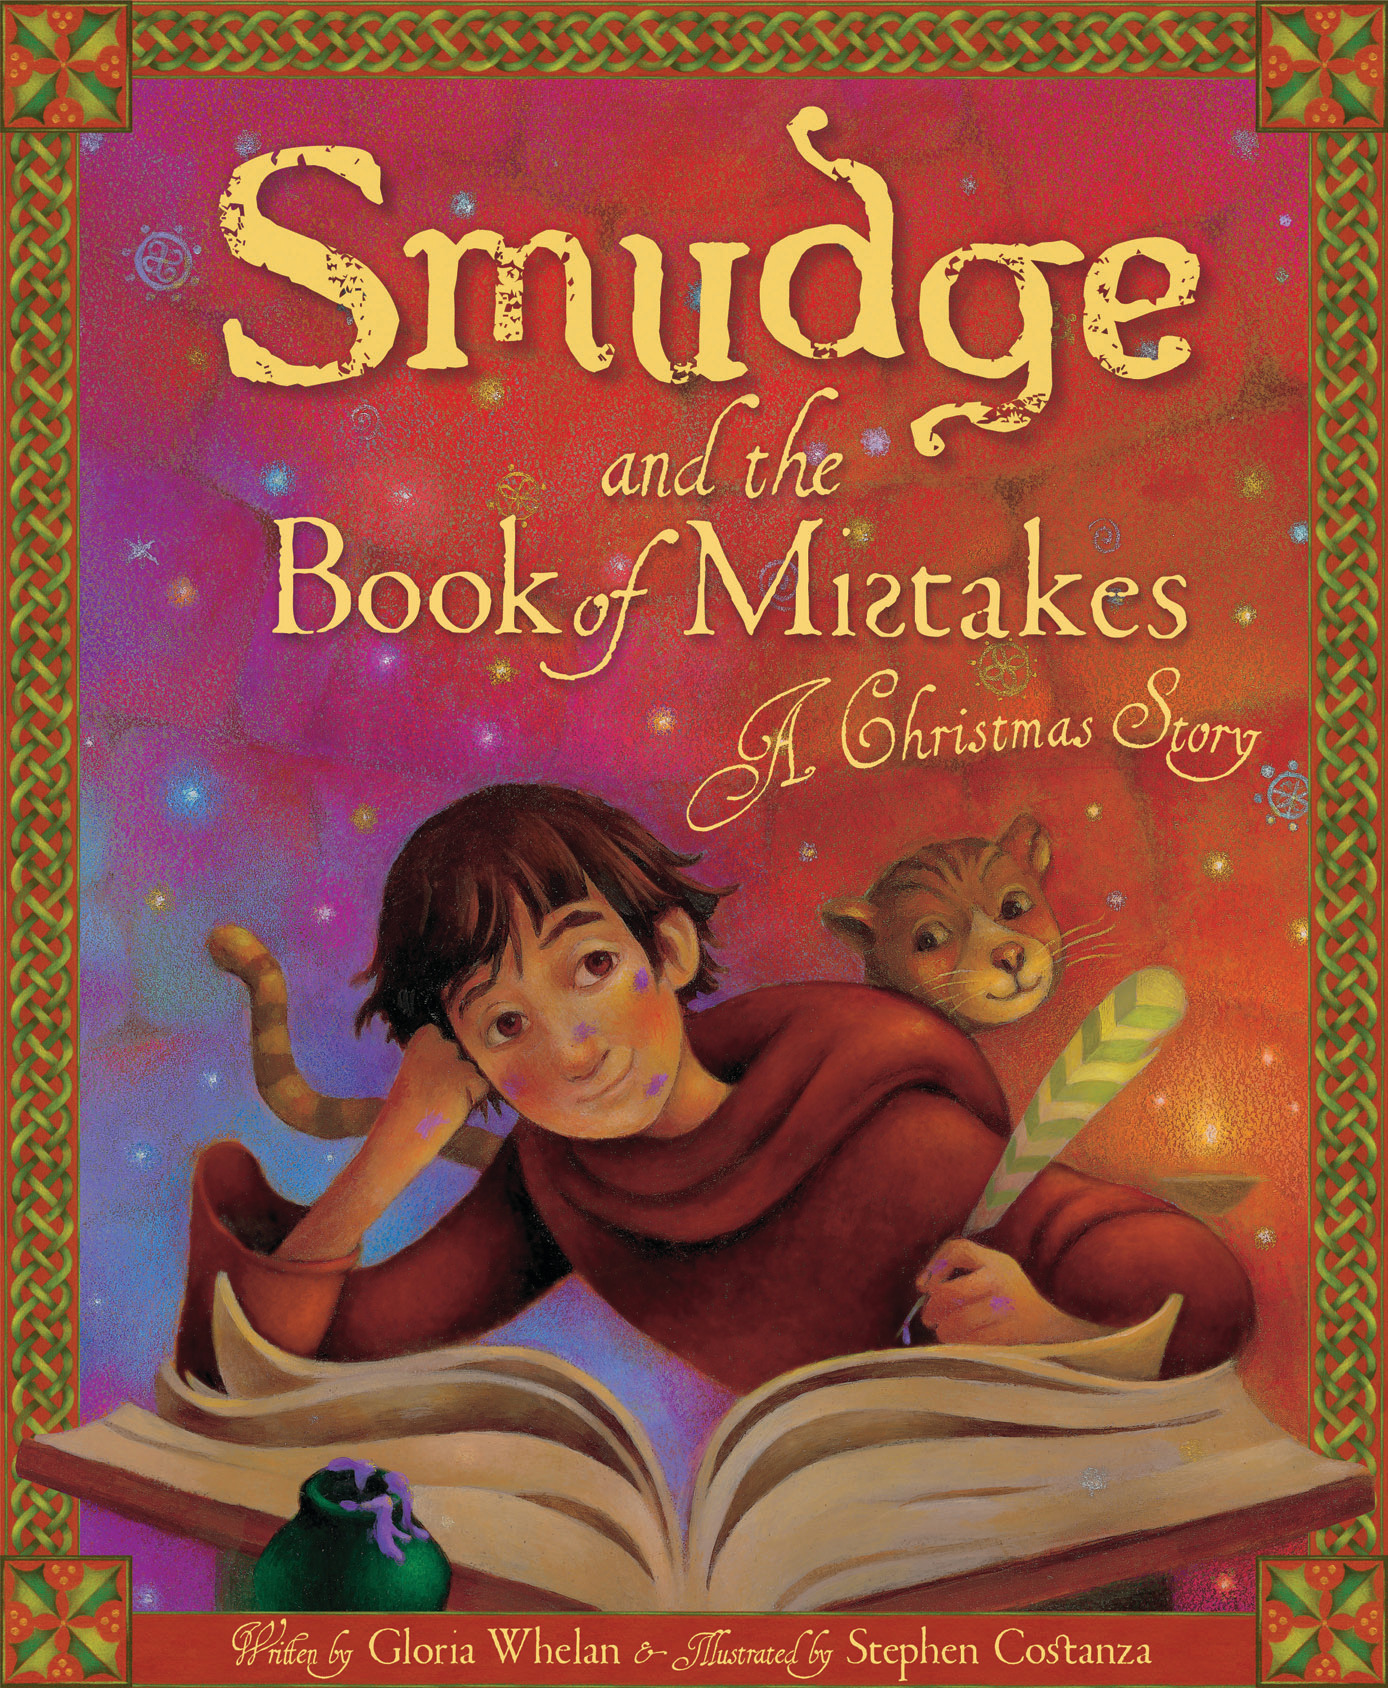 Smudge and the Book of Mistakes (2012) by Gloria Whelan